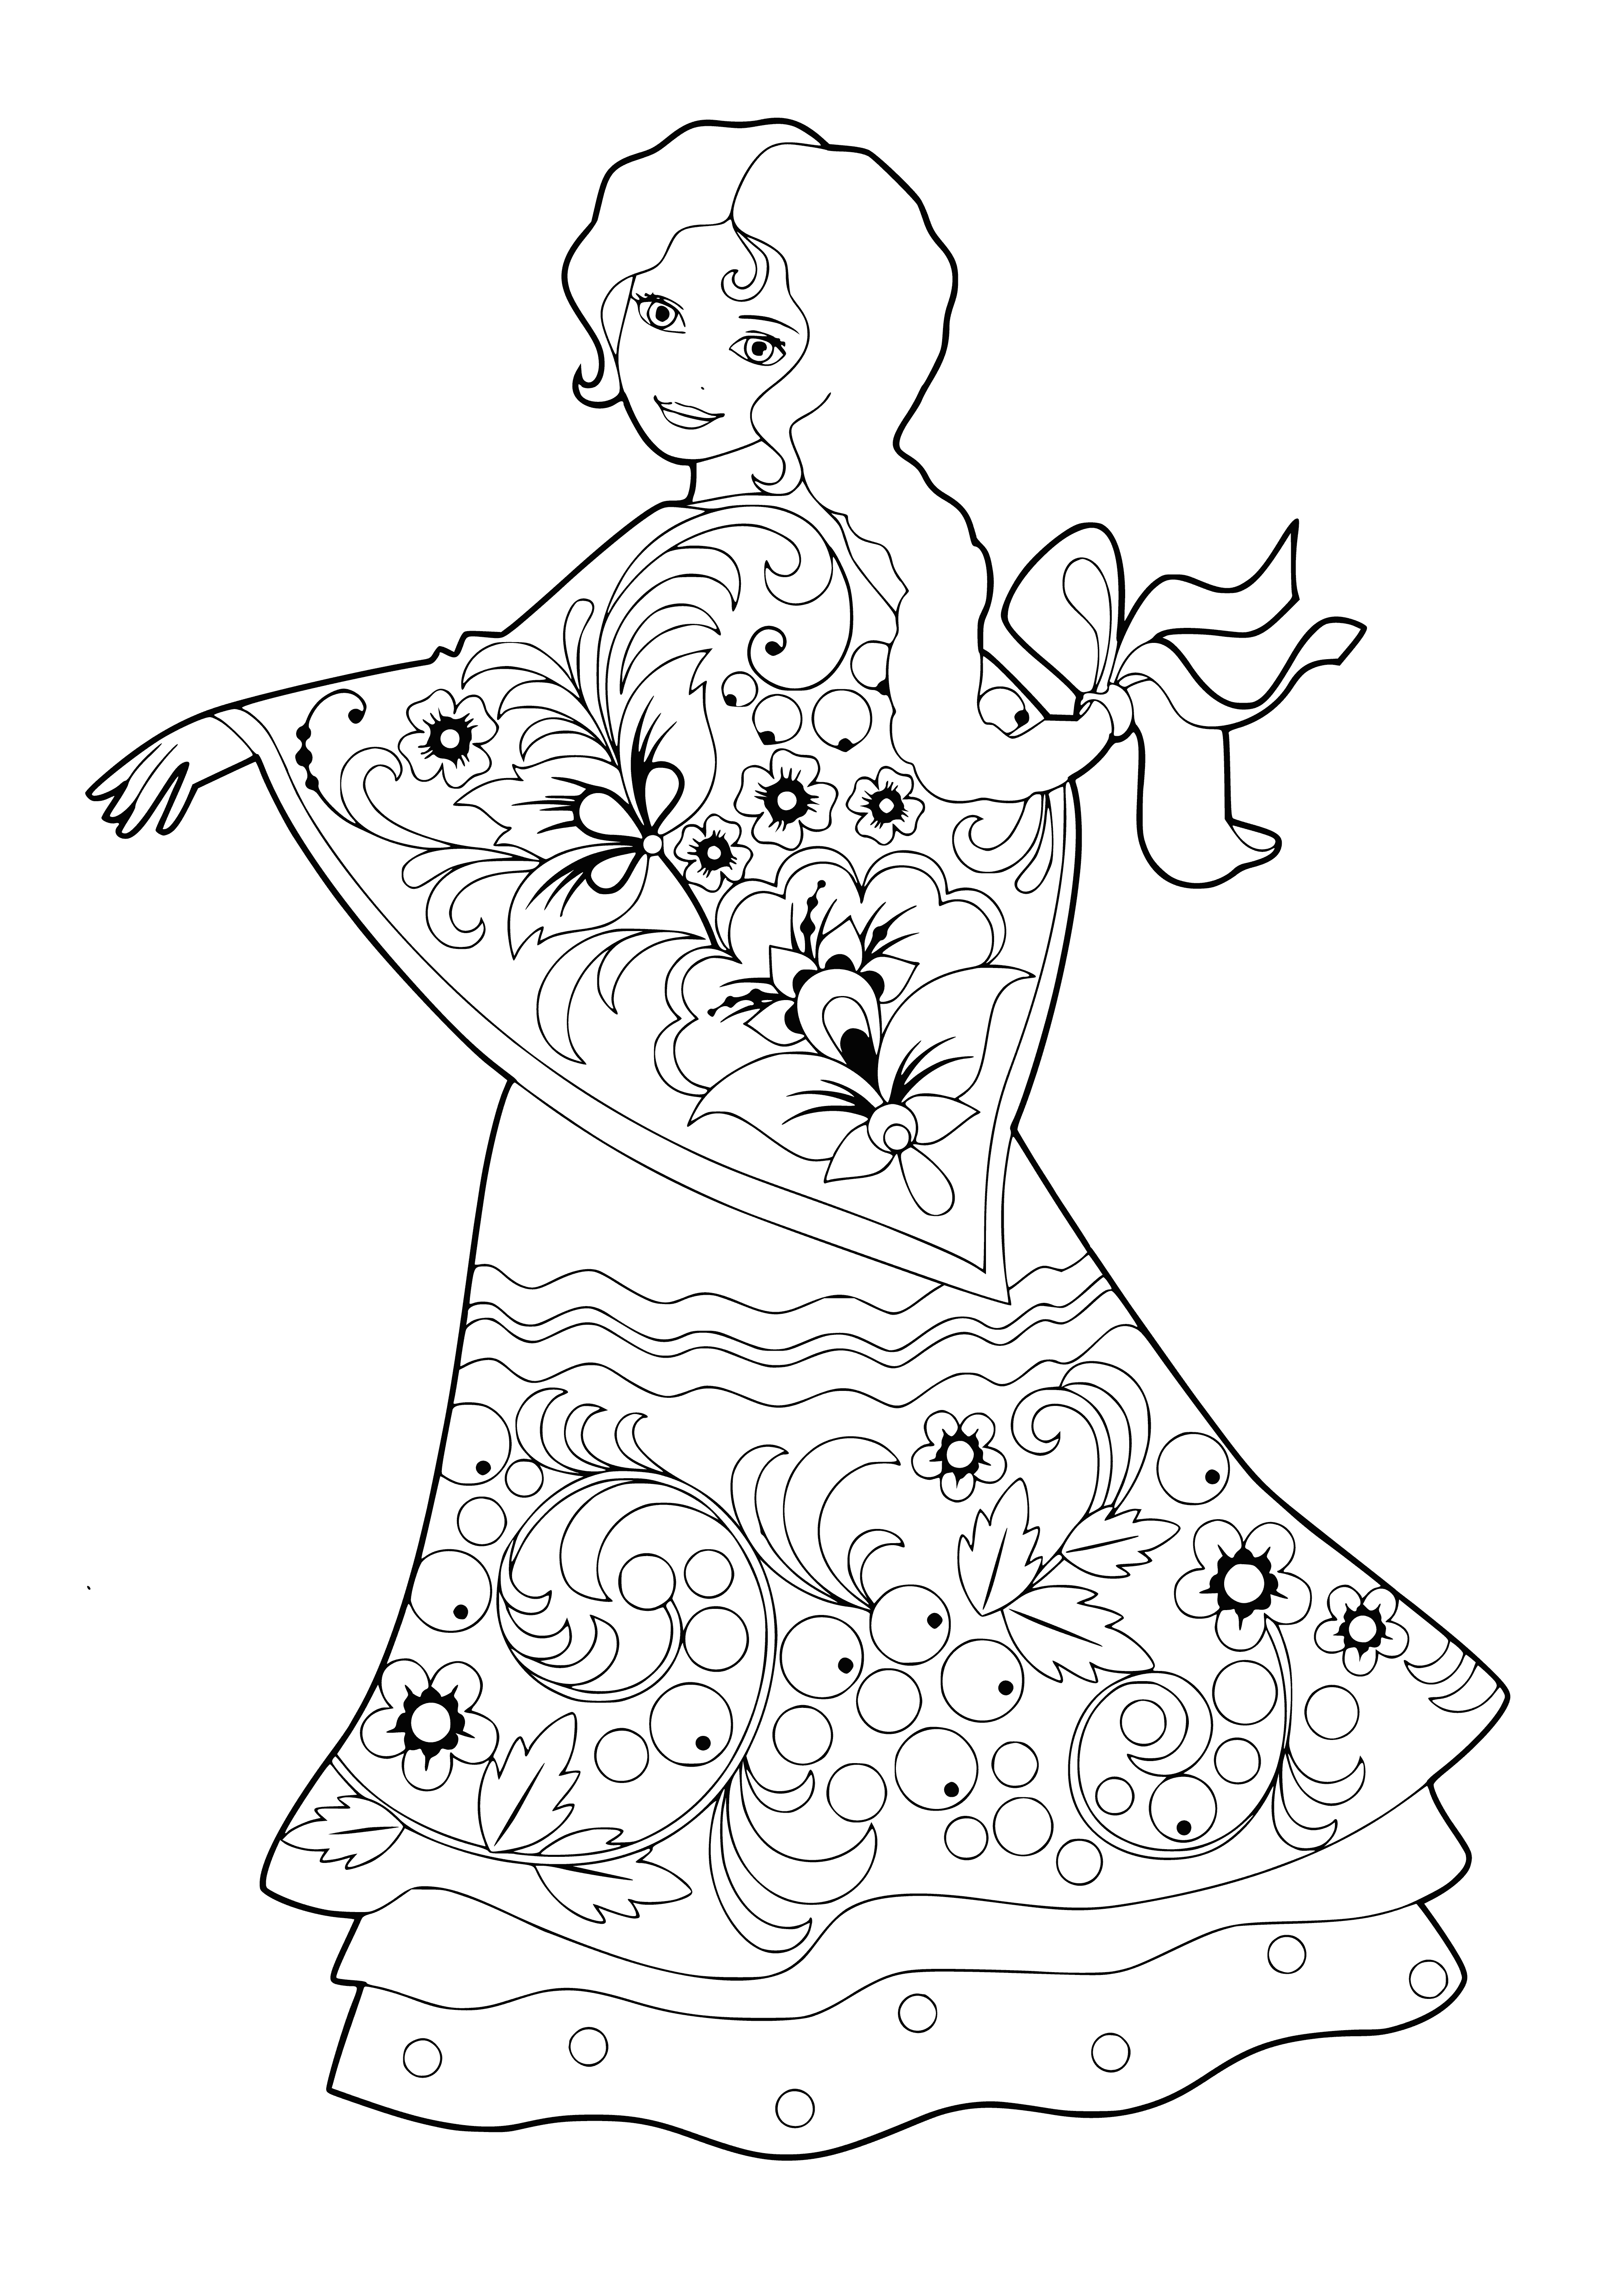 coloring page: Group of beautiful Russian women in white dresses pose smiling & looking at camera with bright blue eyes.